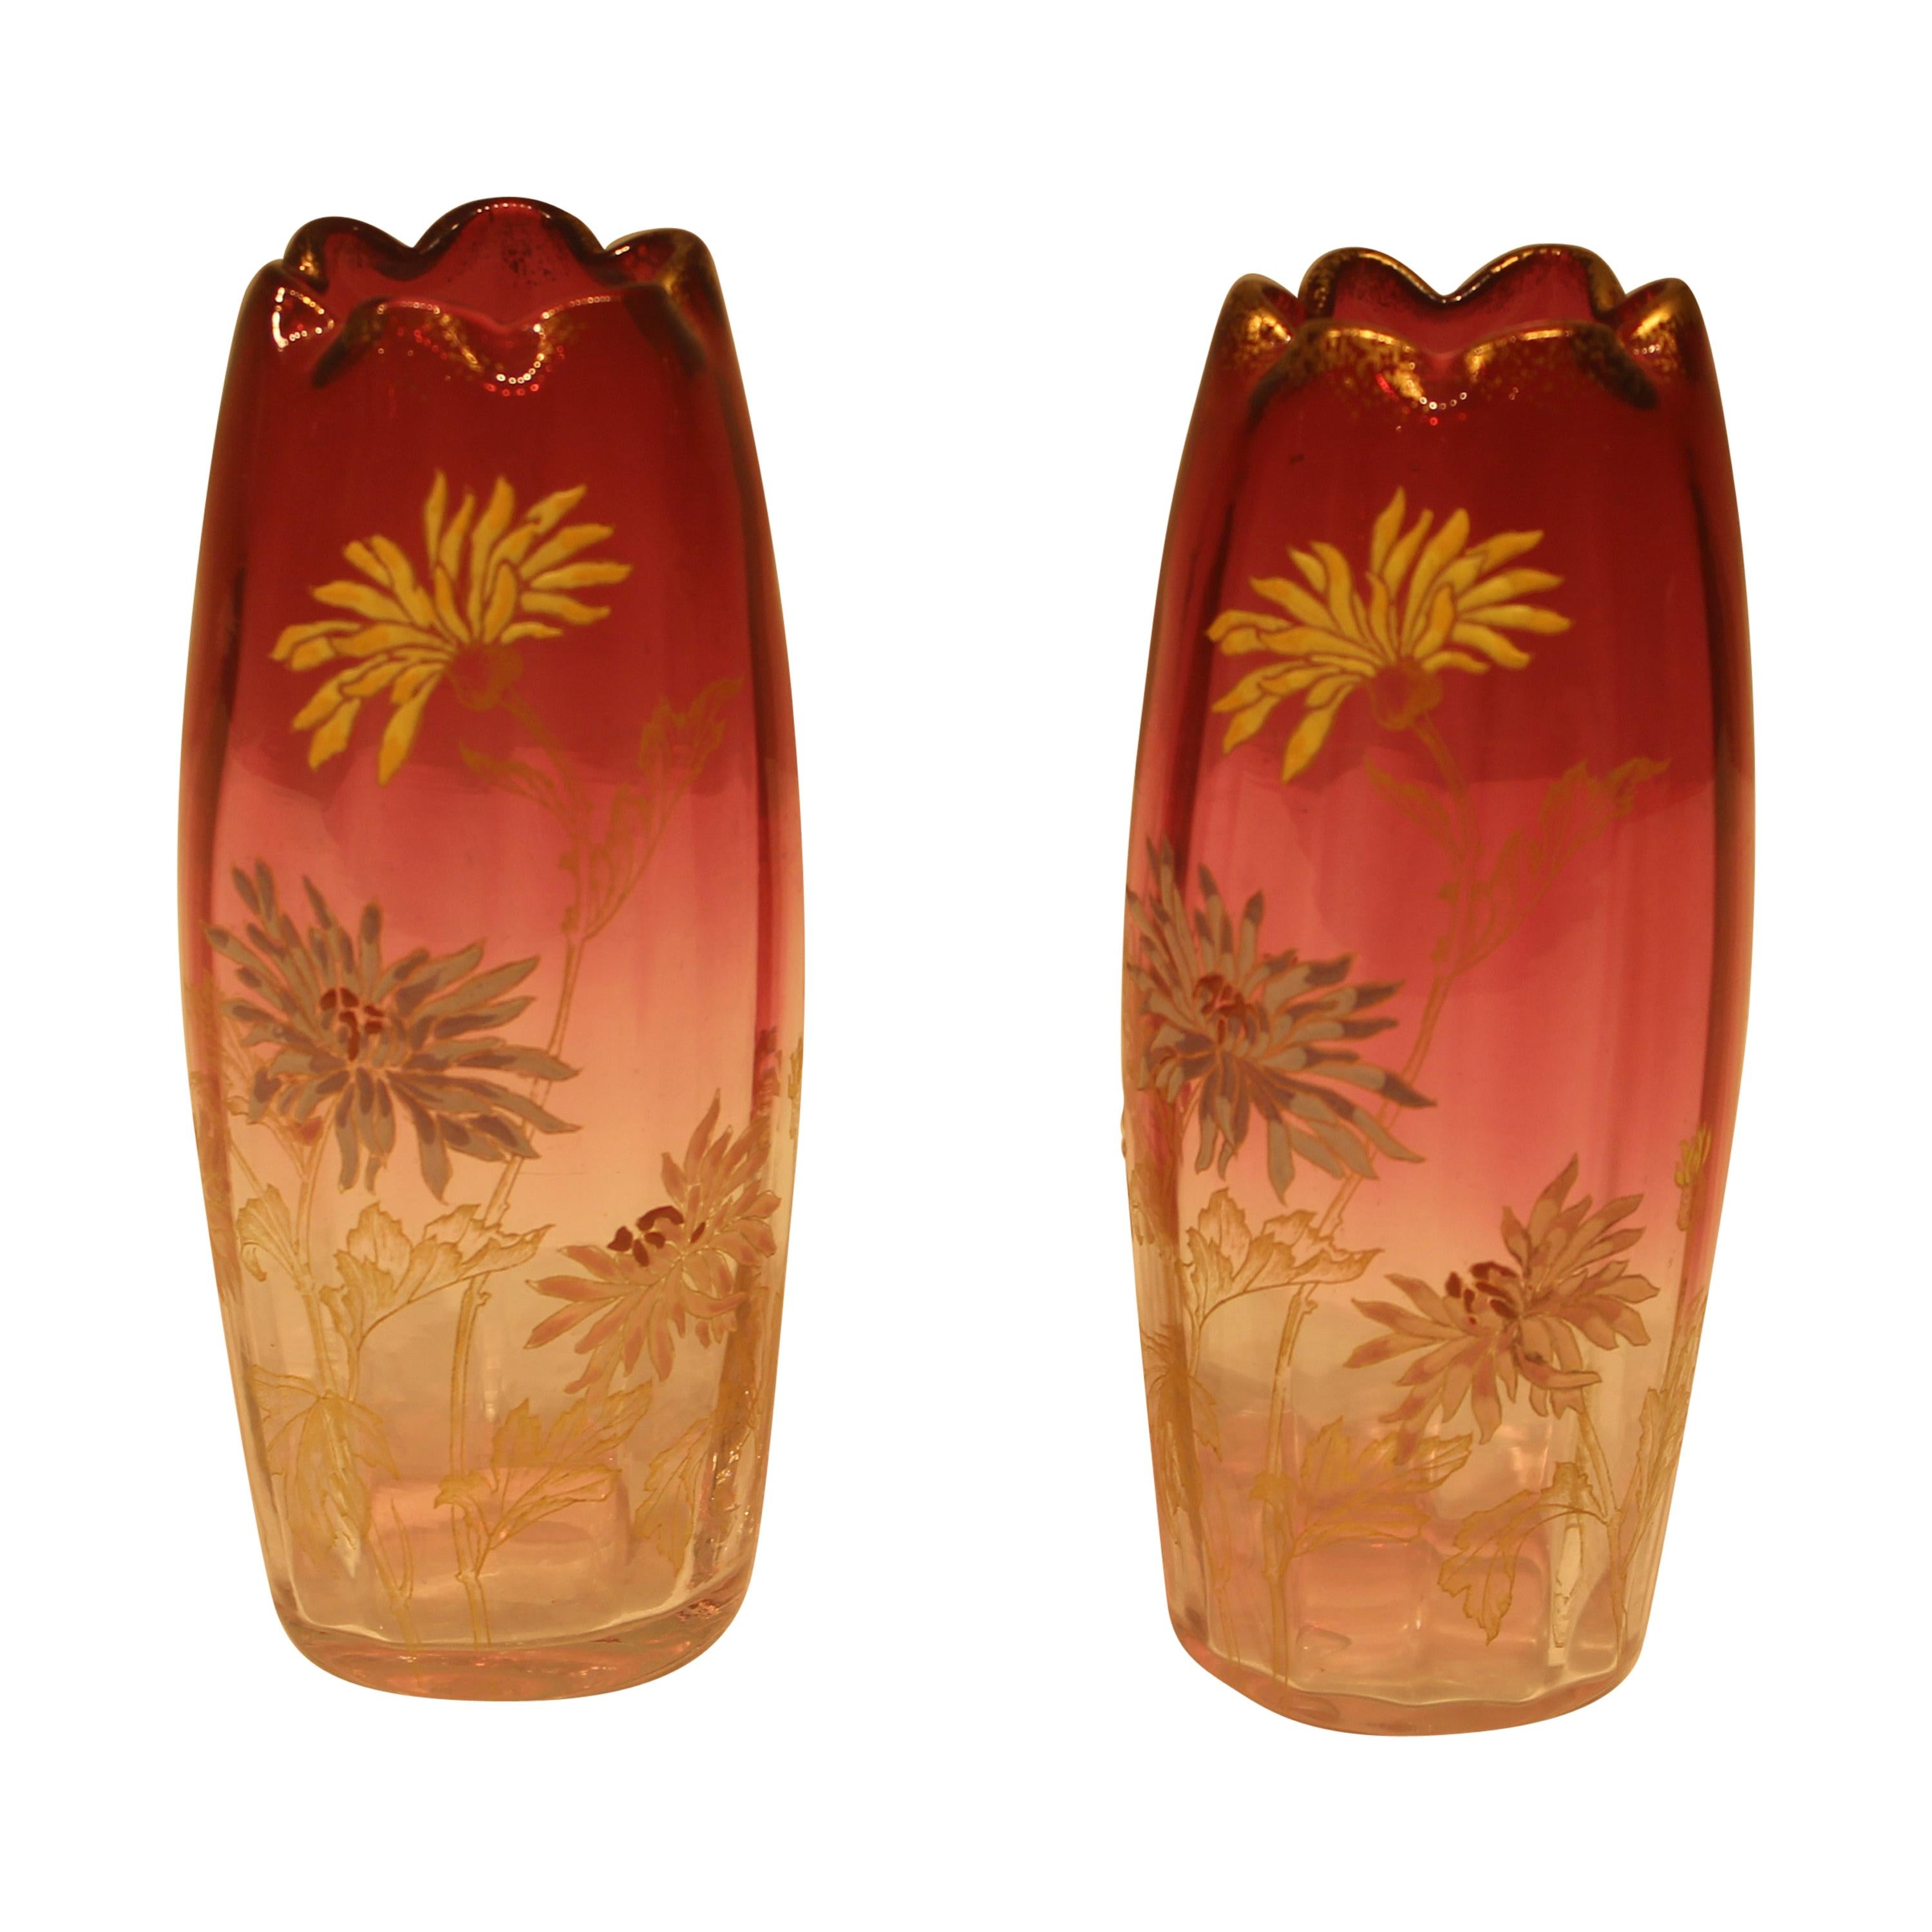 Pair of Early 20th Century Enameled Vases, Mount Joy For Sale